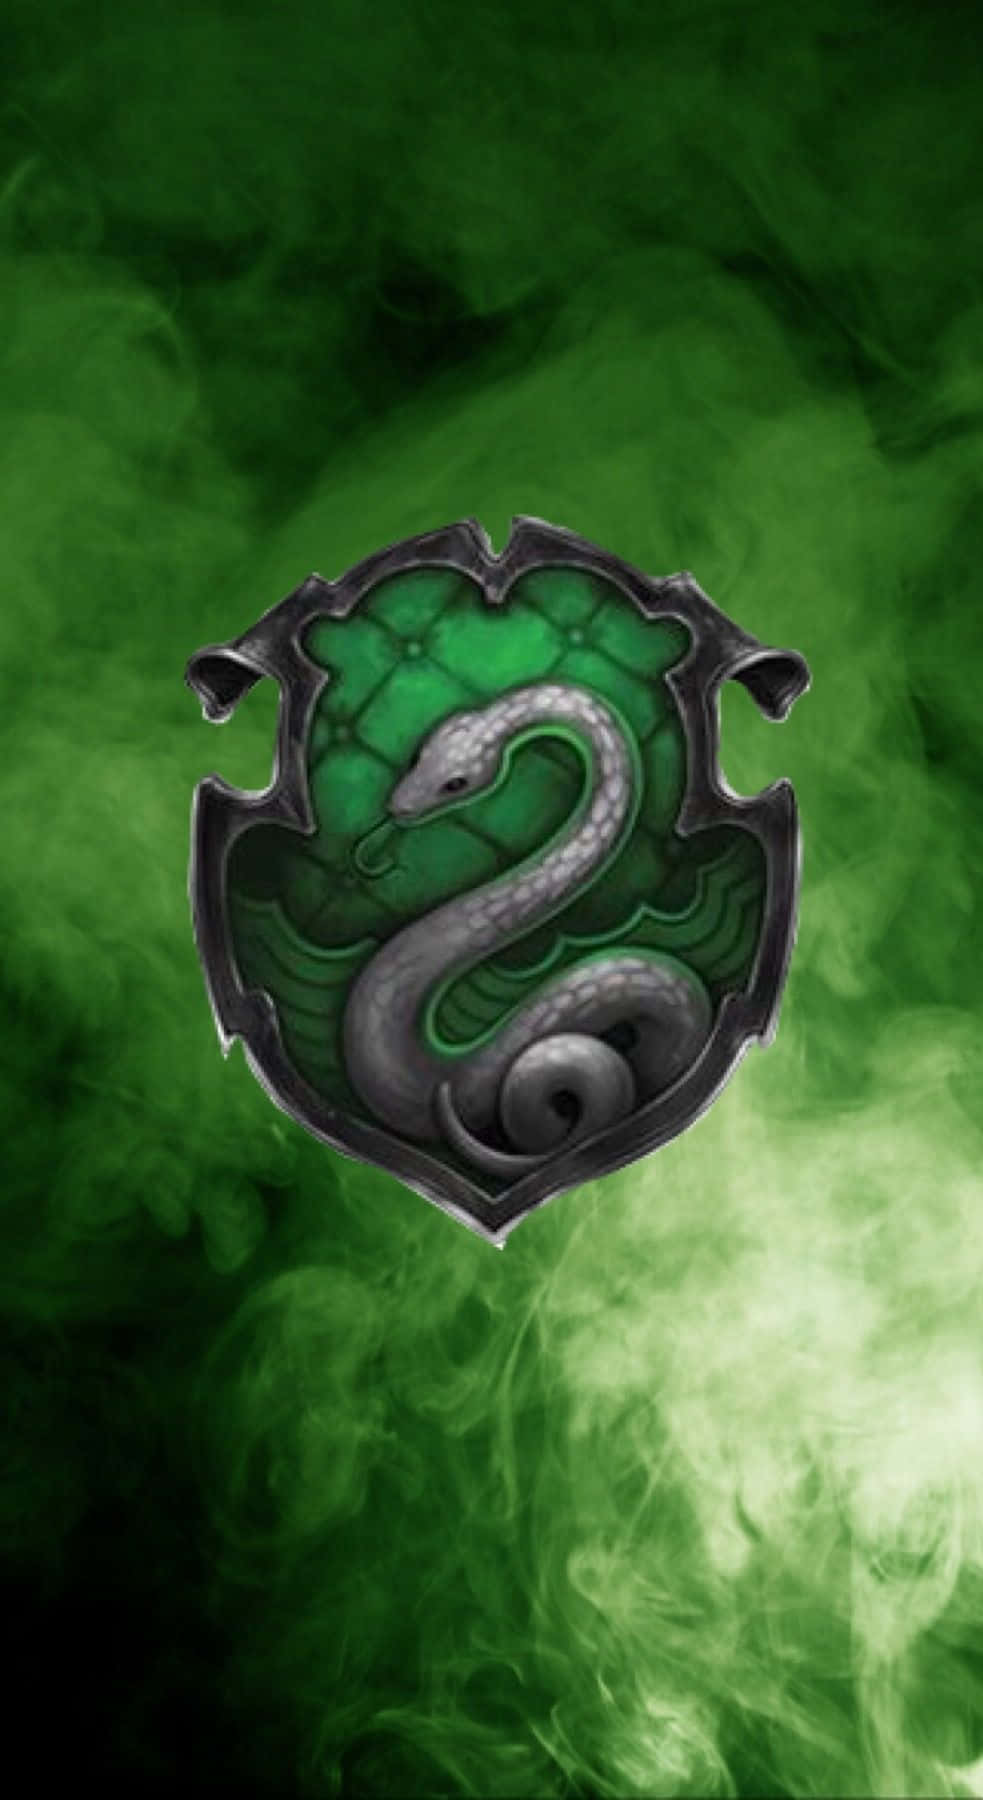 "Introducing the Slytherin Phone, the most advanced smartphone availale worldwide" Wallpaper